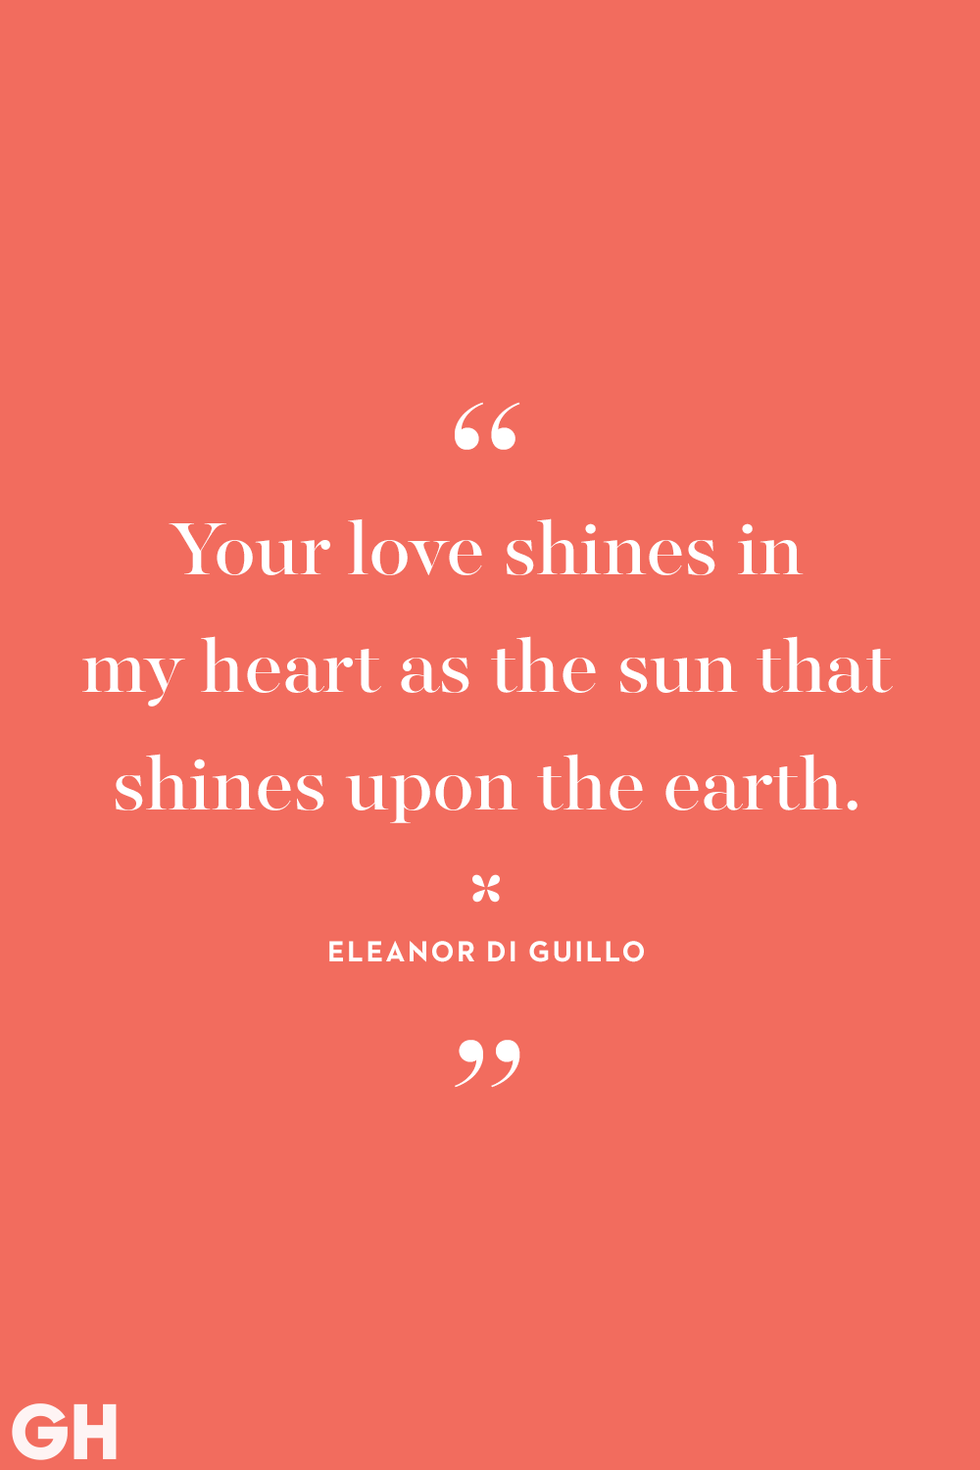 41 Cute Love Quotes For Her From The Heart